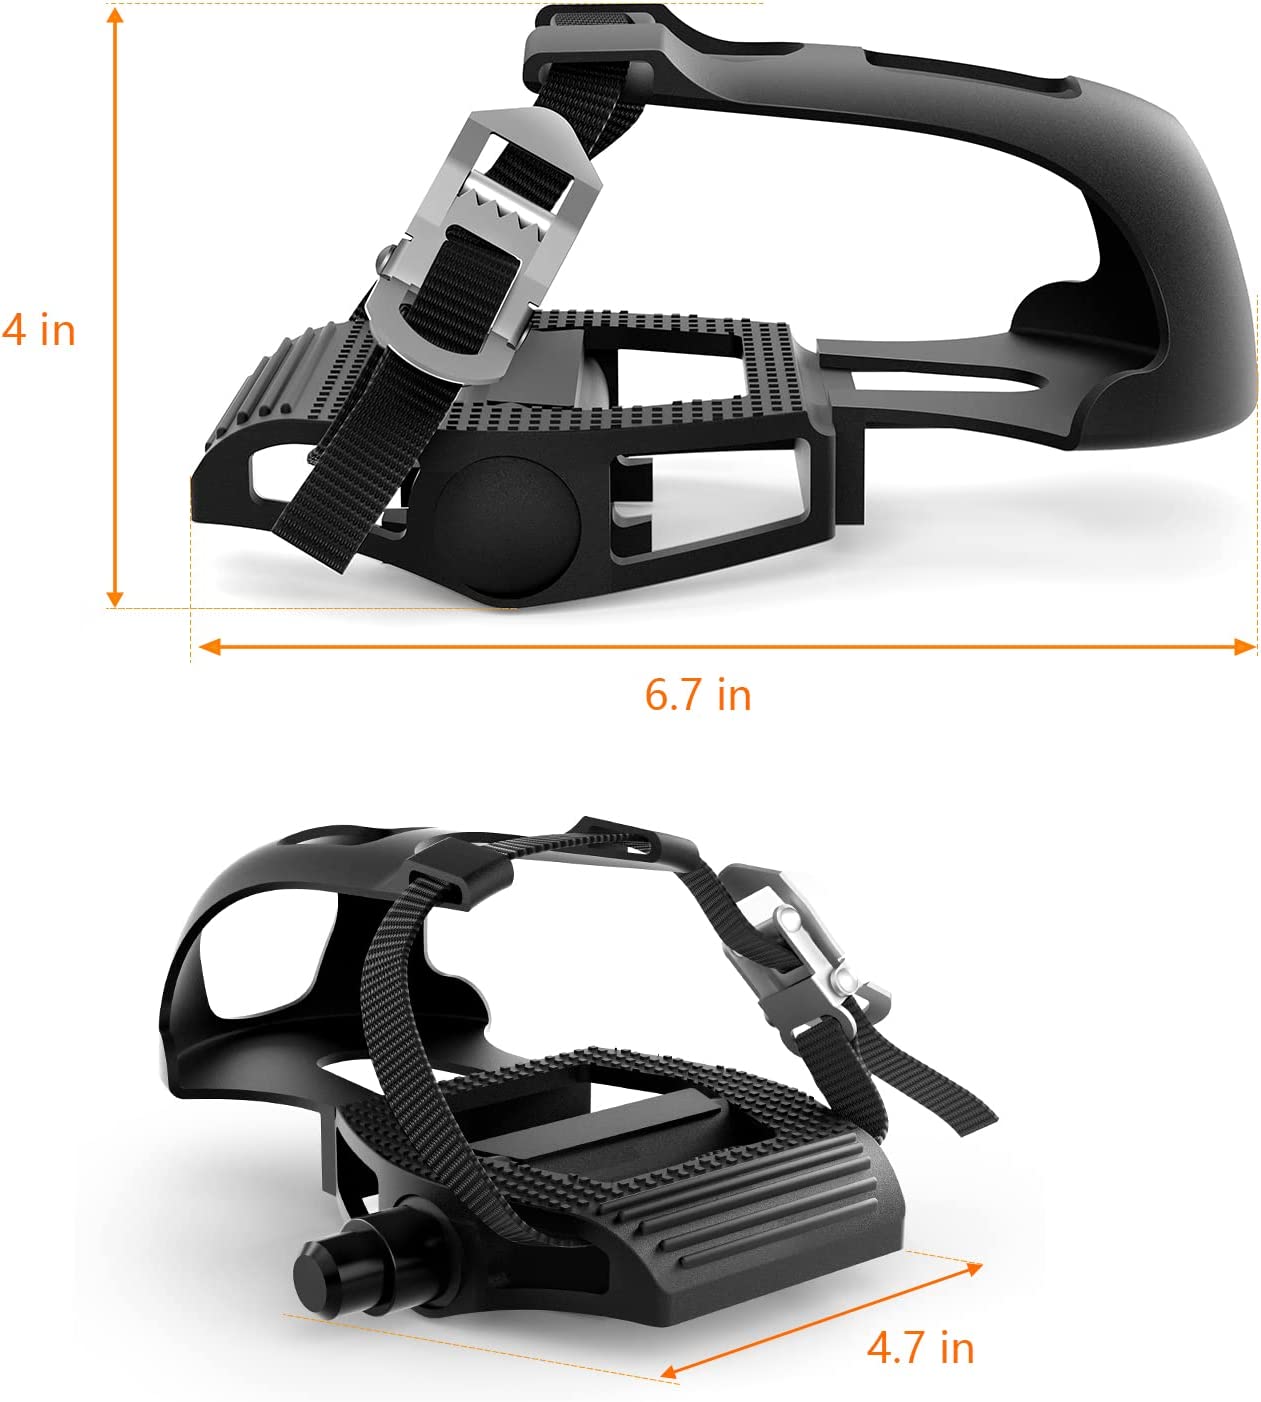 Yesoul Bike Pedals With Toe Clips Cage